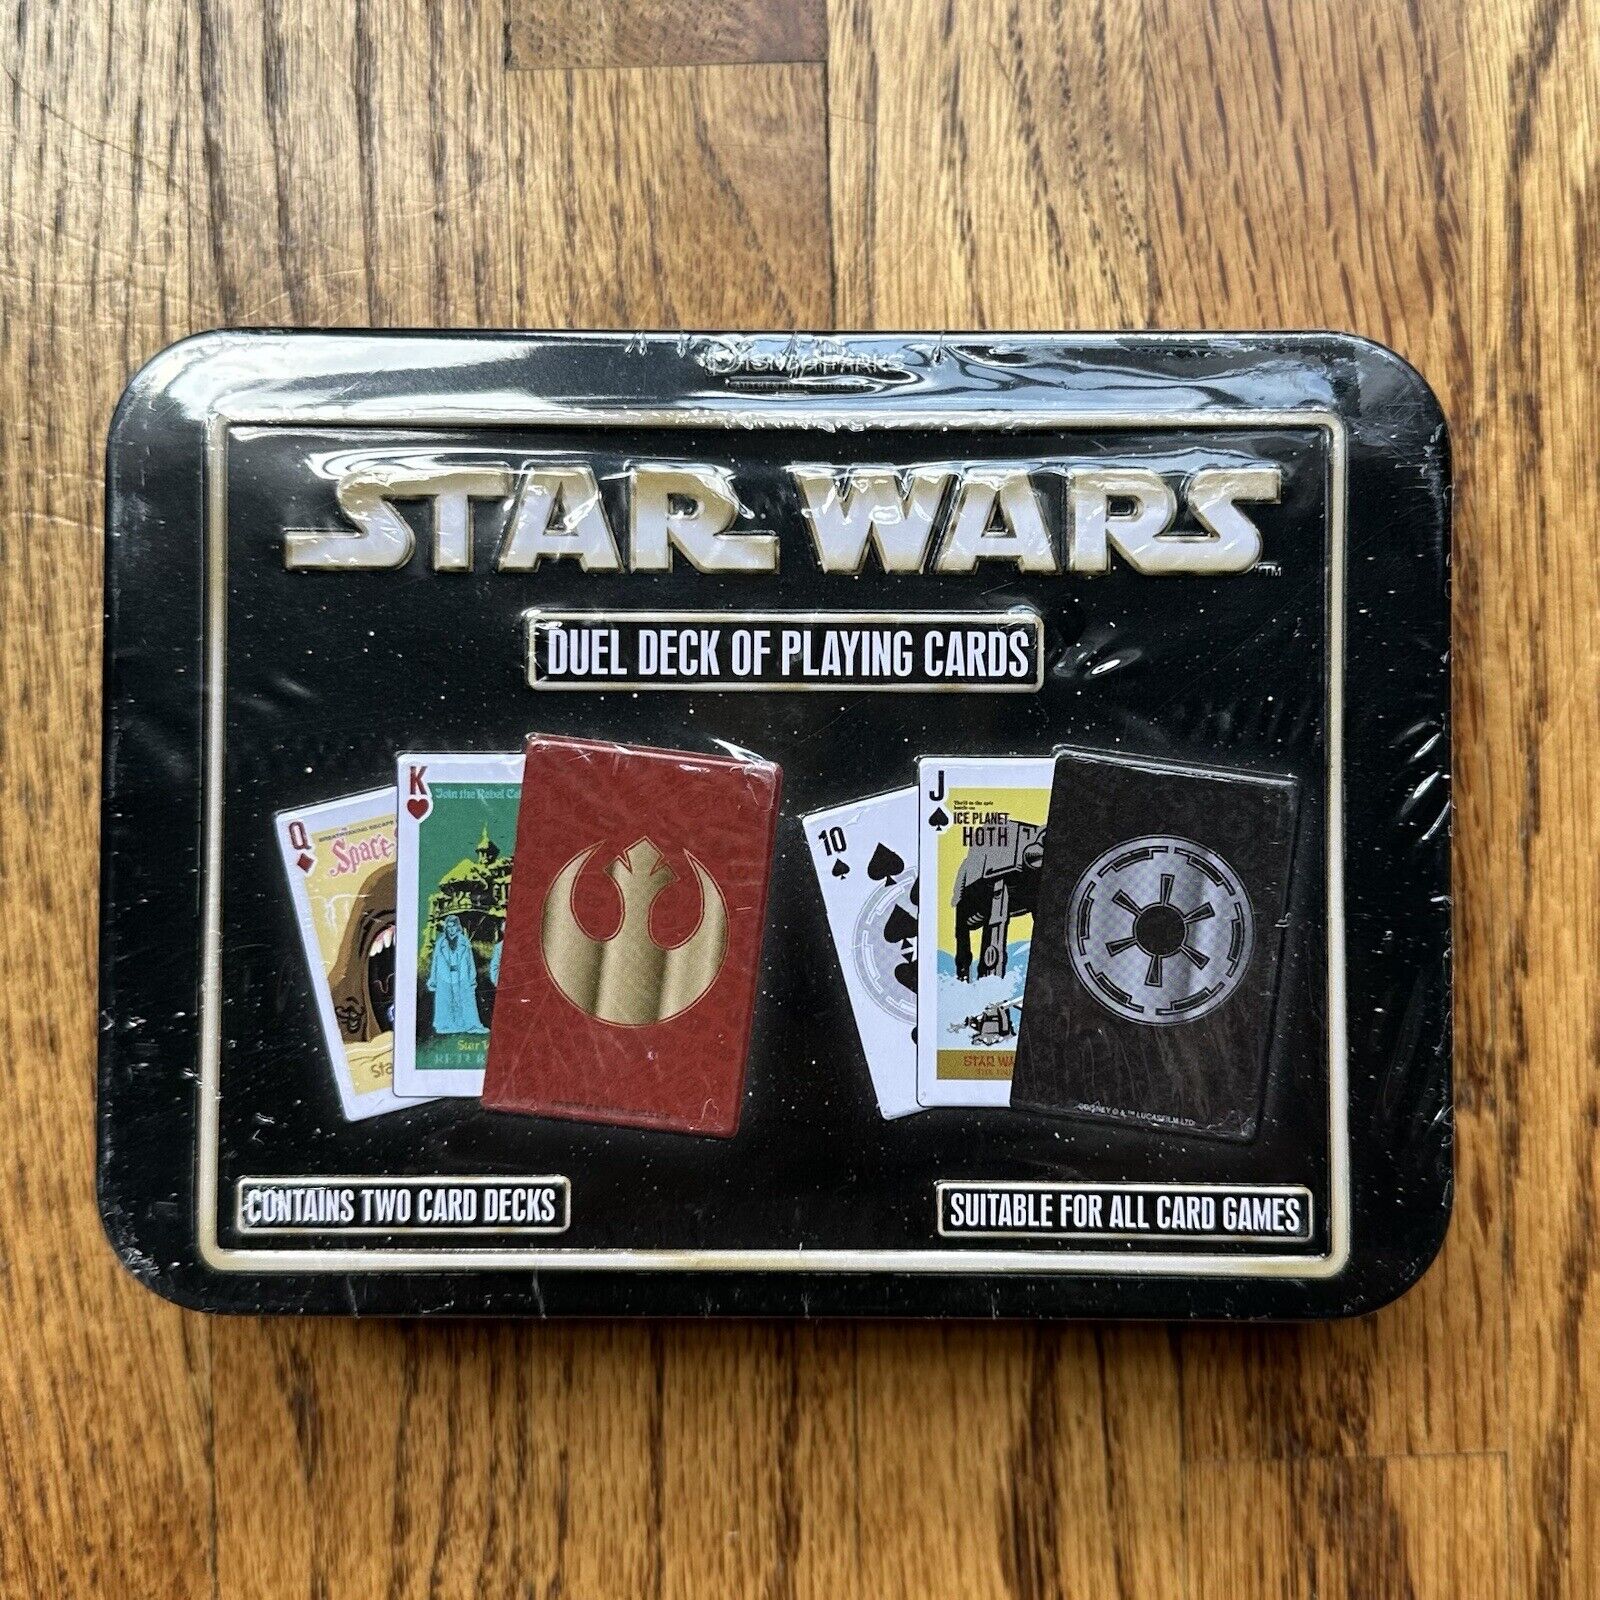 Disney Parks Star Wars Duel Deck of Playing Cards New in Tin Case